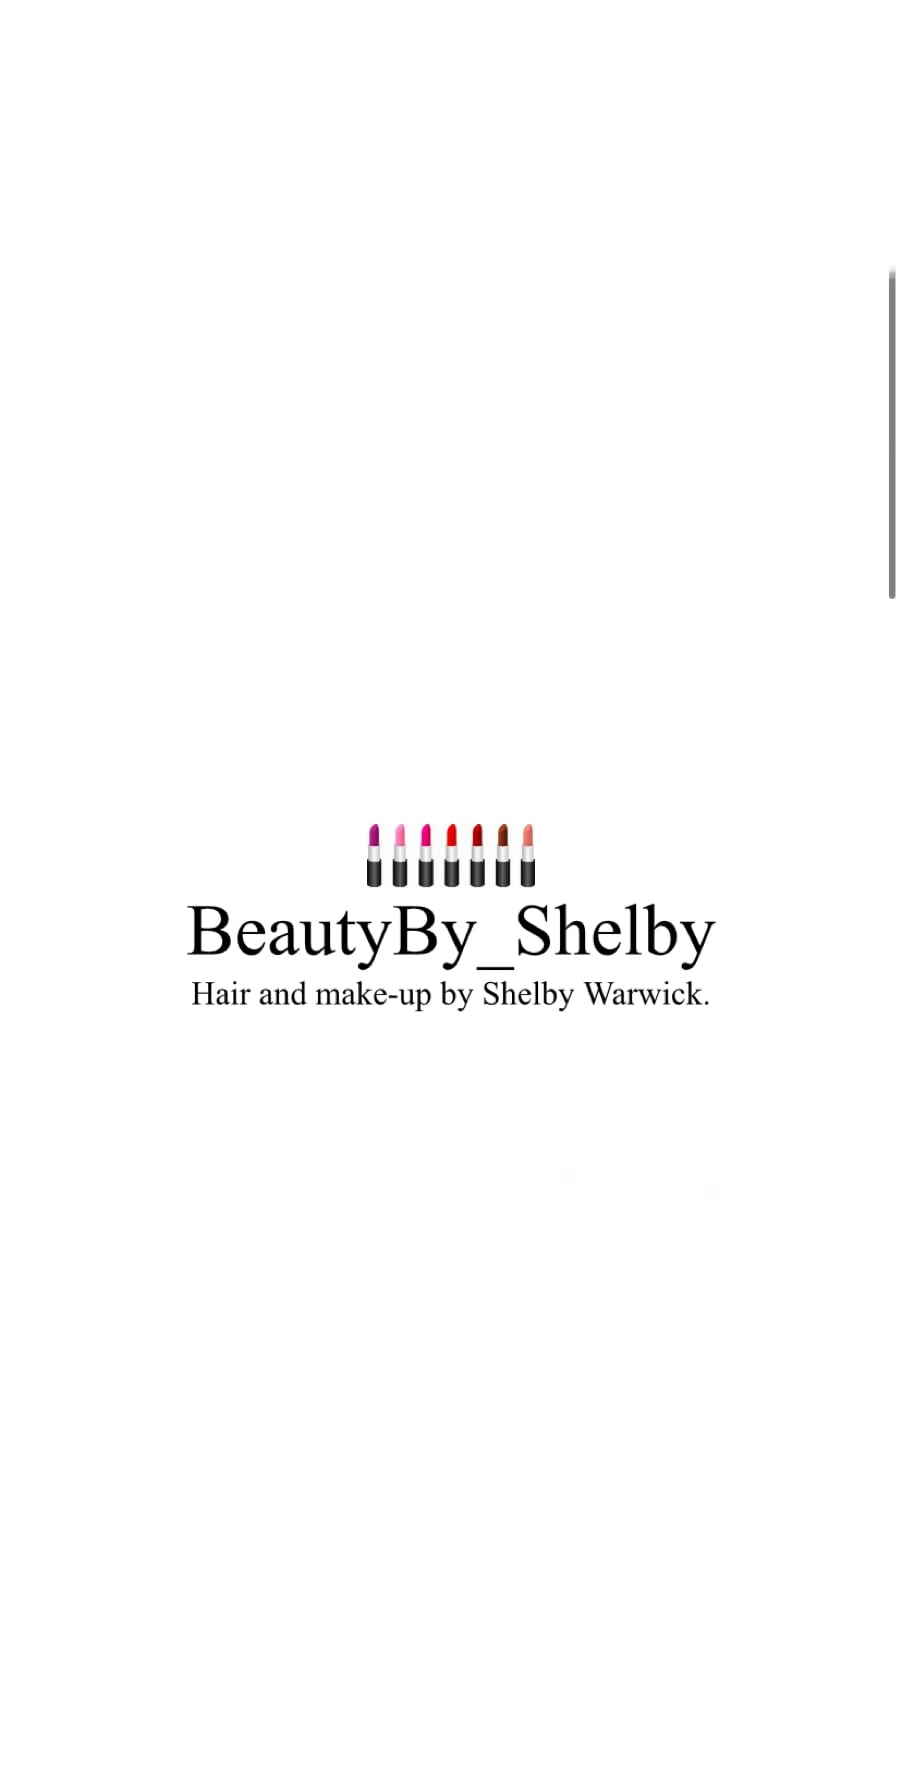 Beautyby Shelby